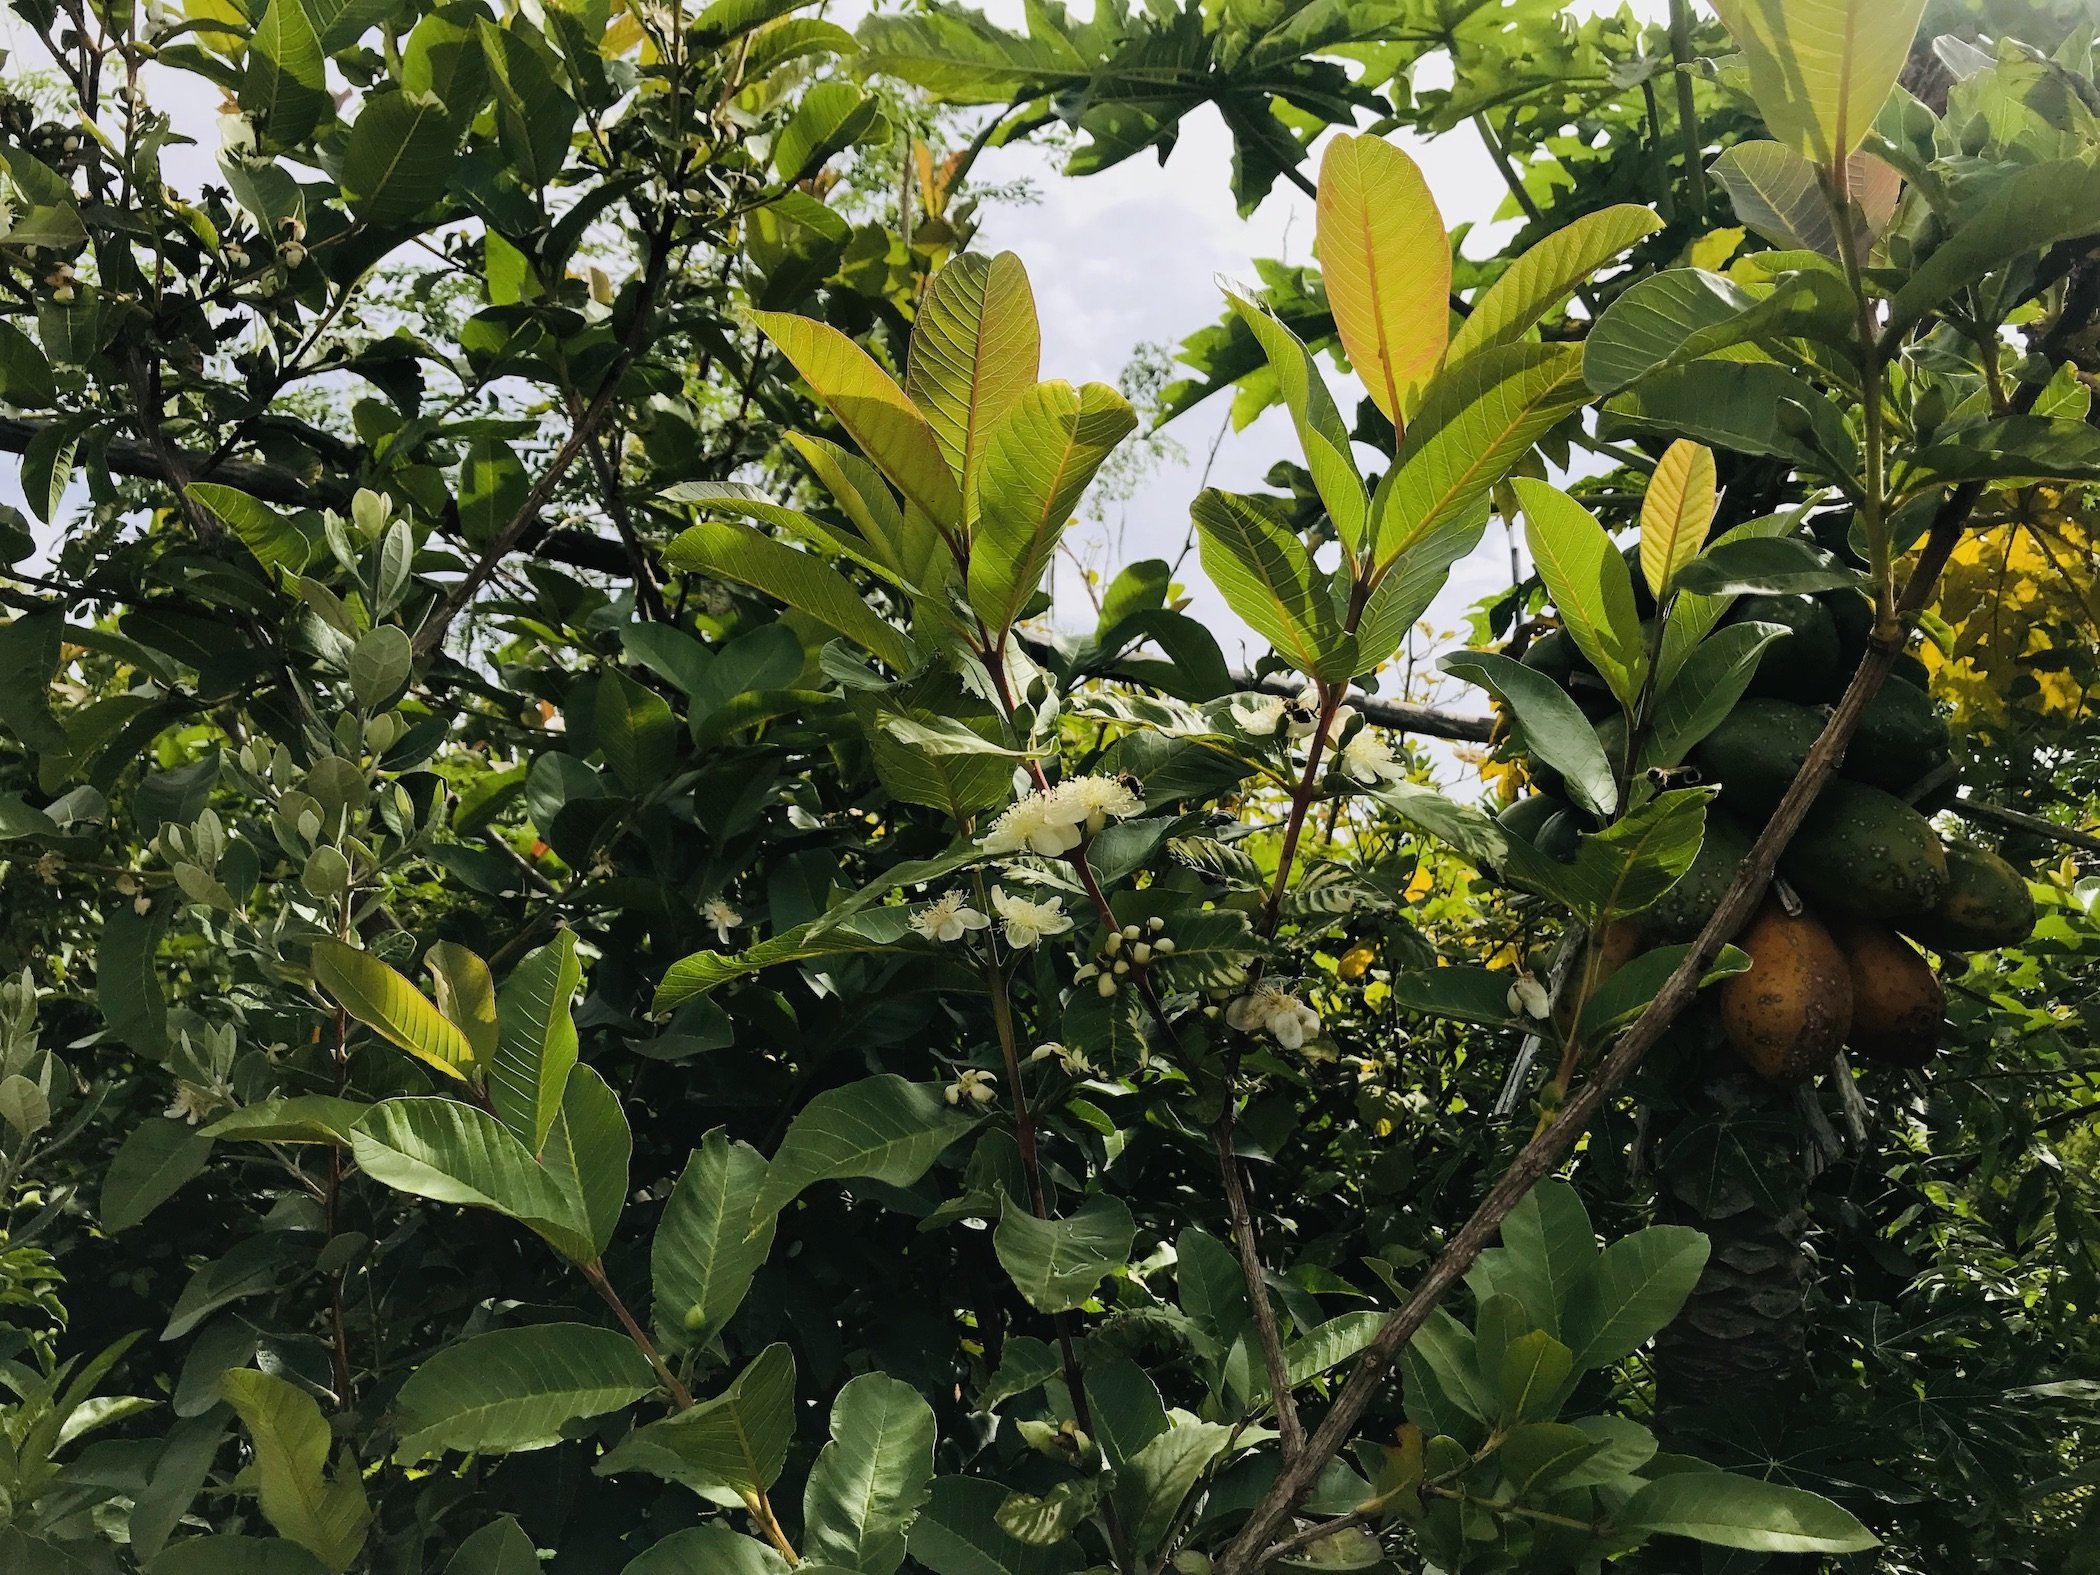 Two years after planting, a Psidium guajava (guava) tree bears pretty white flowers